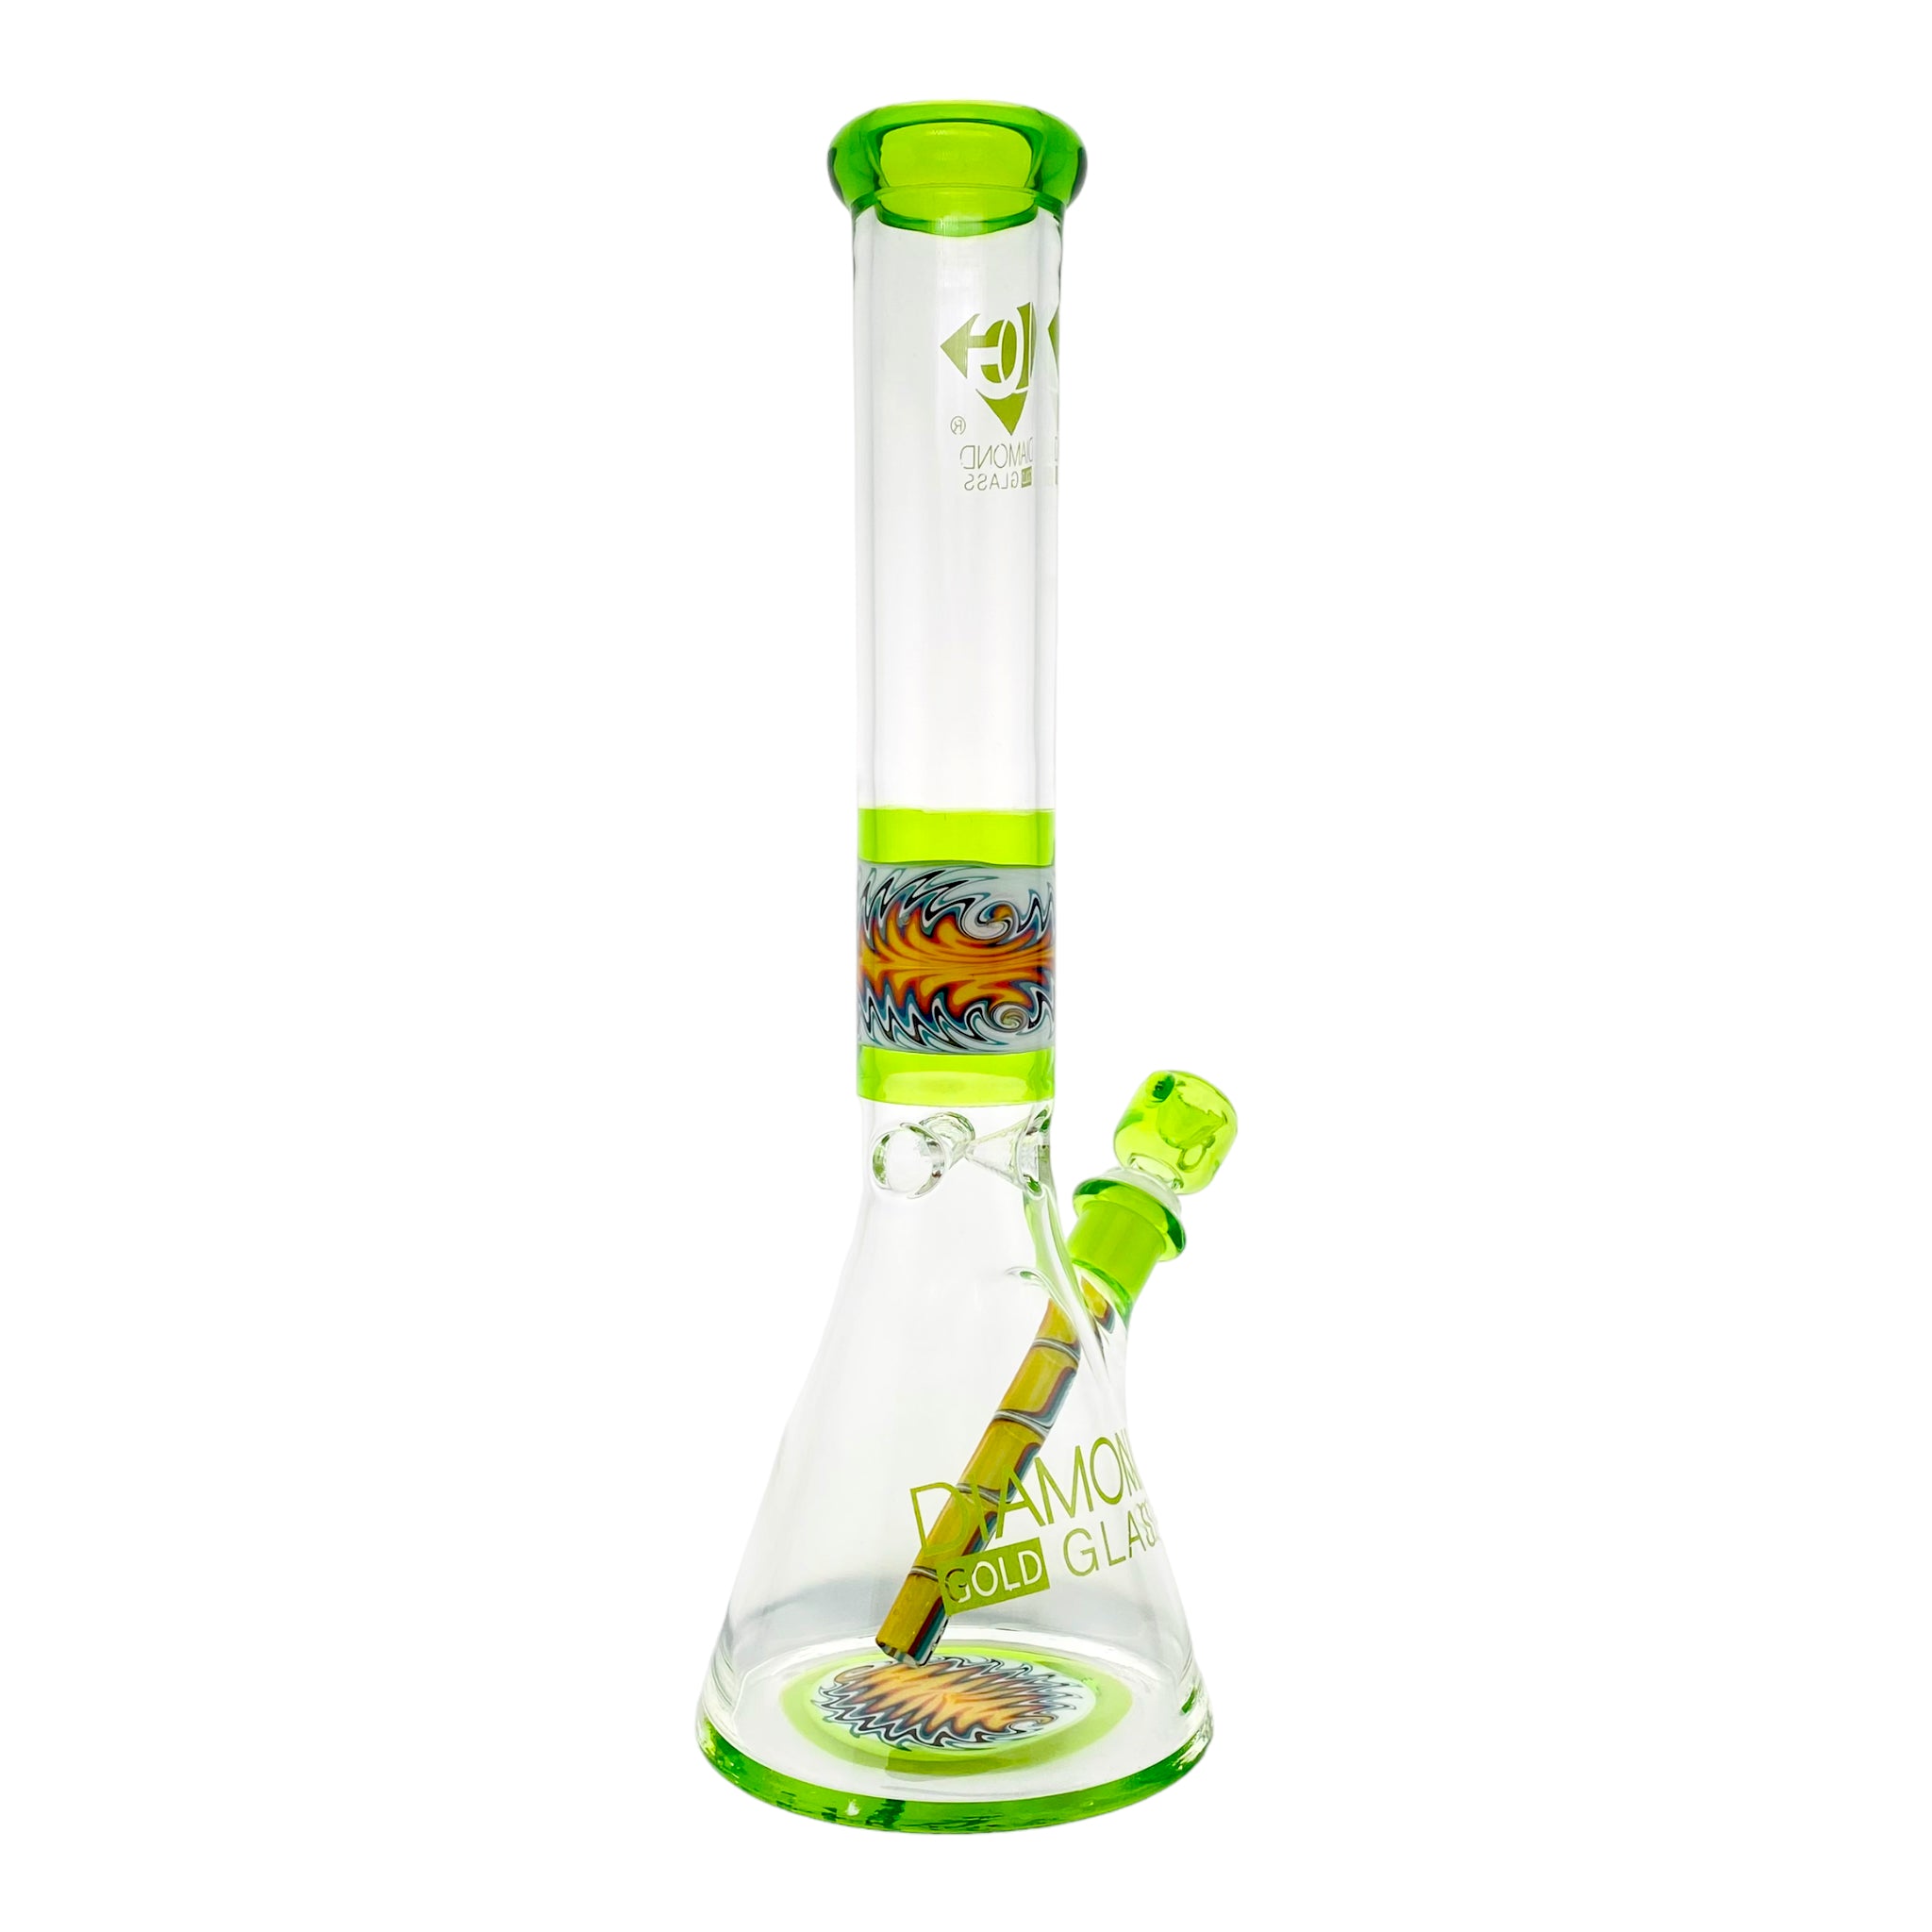 Diamond Glass - 15 Inch Green With Wig Wag Sections Beaker Bong